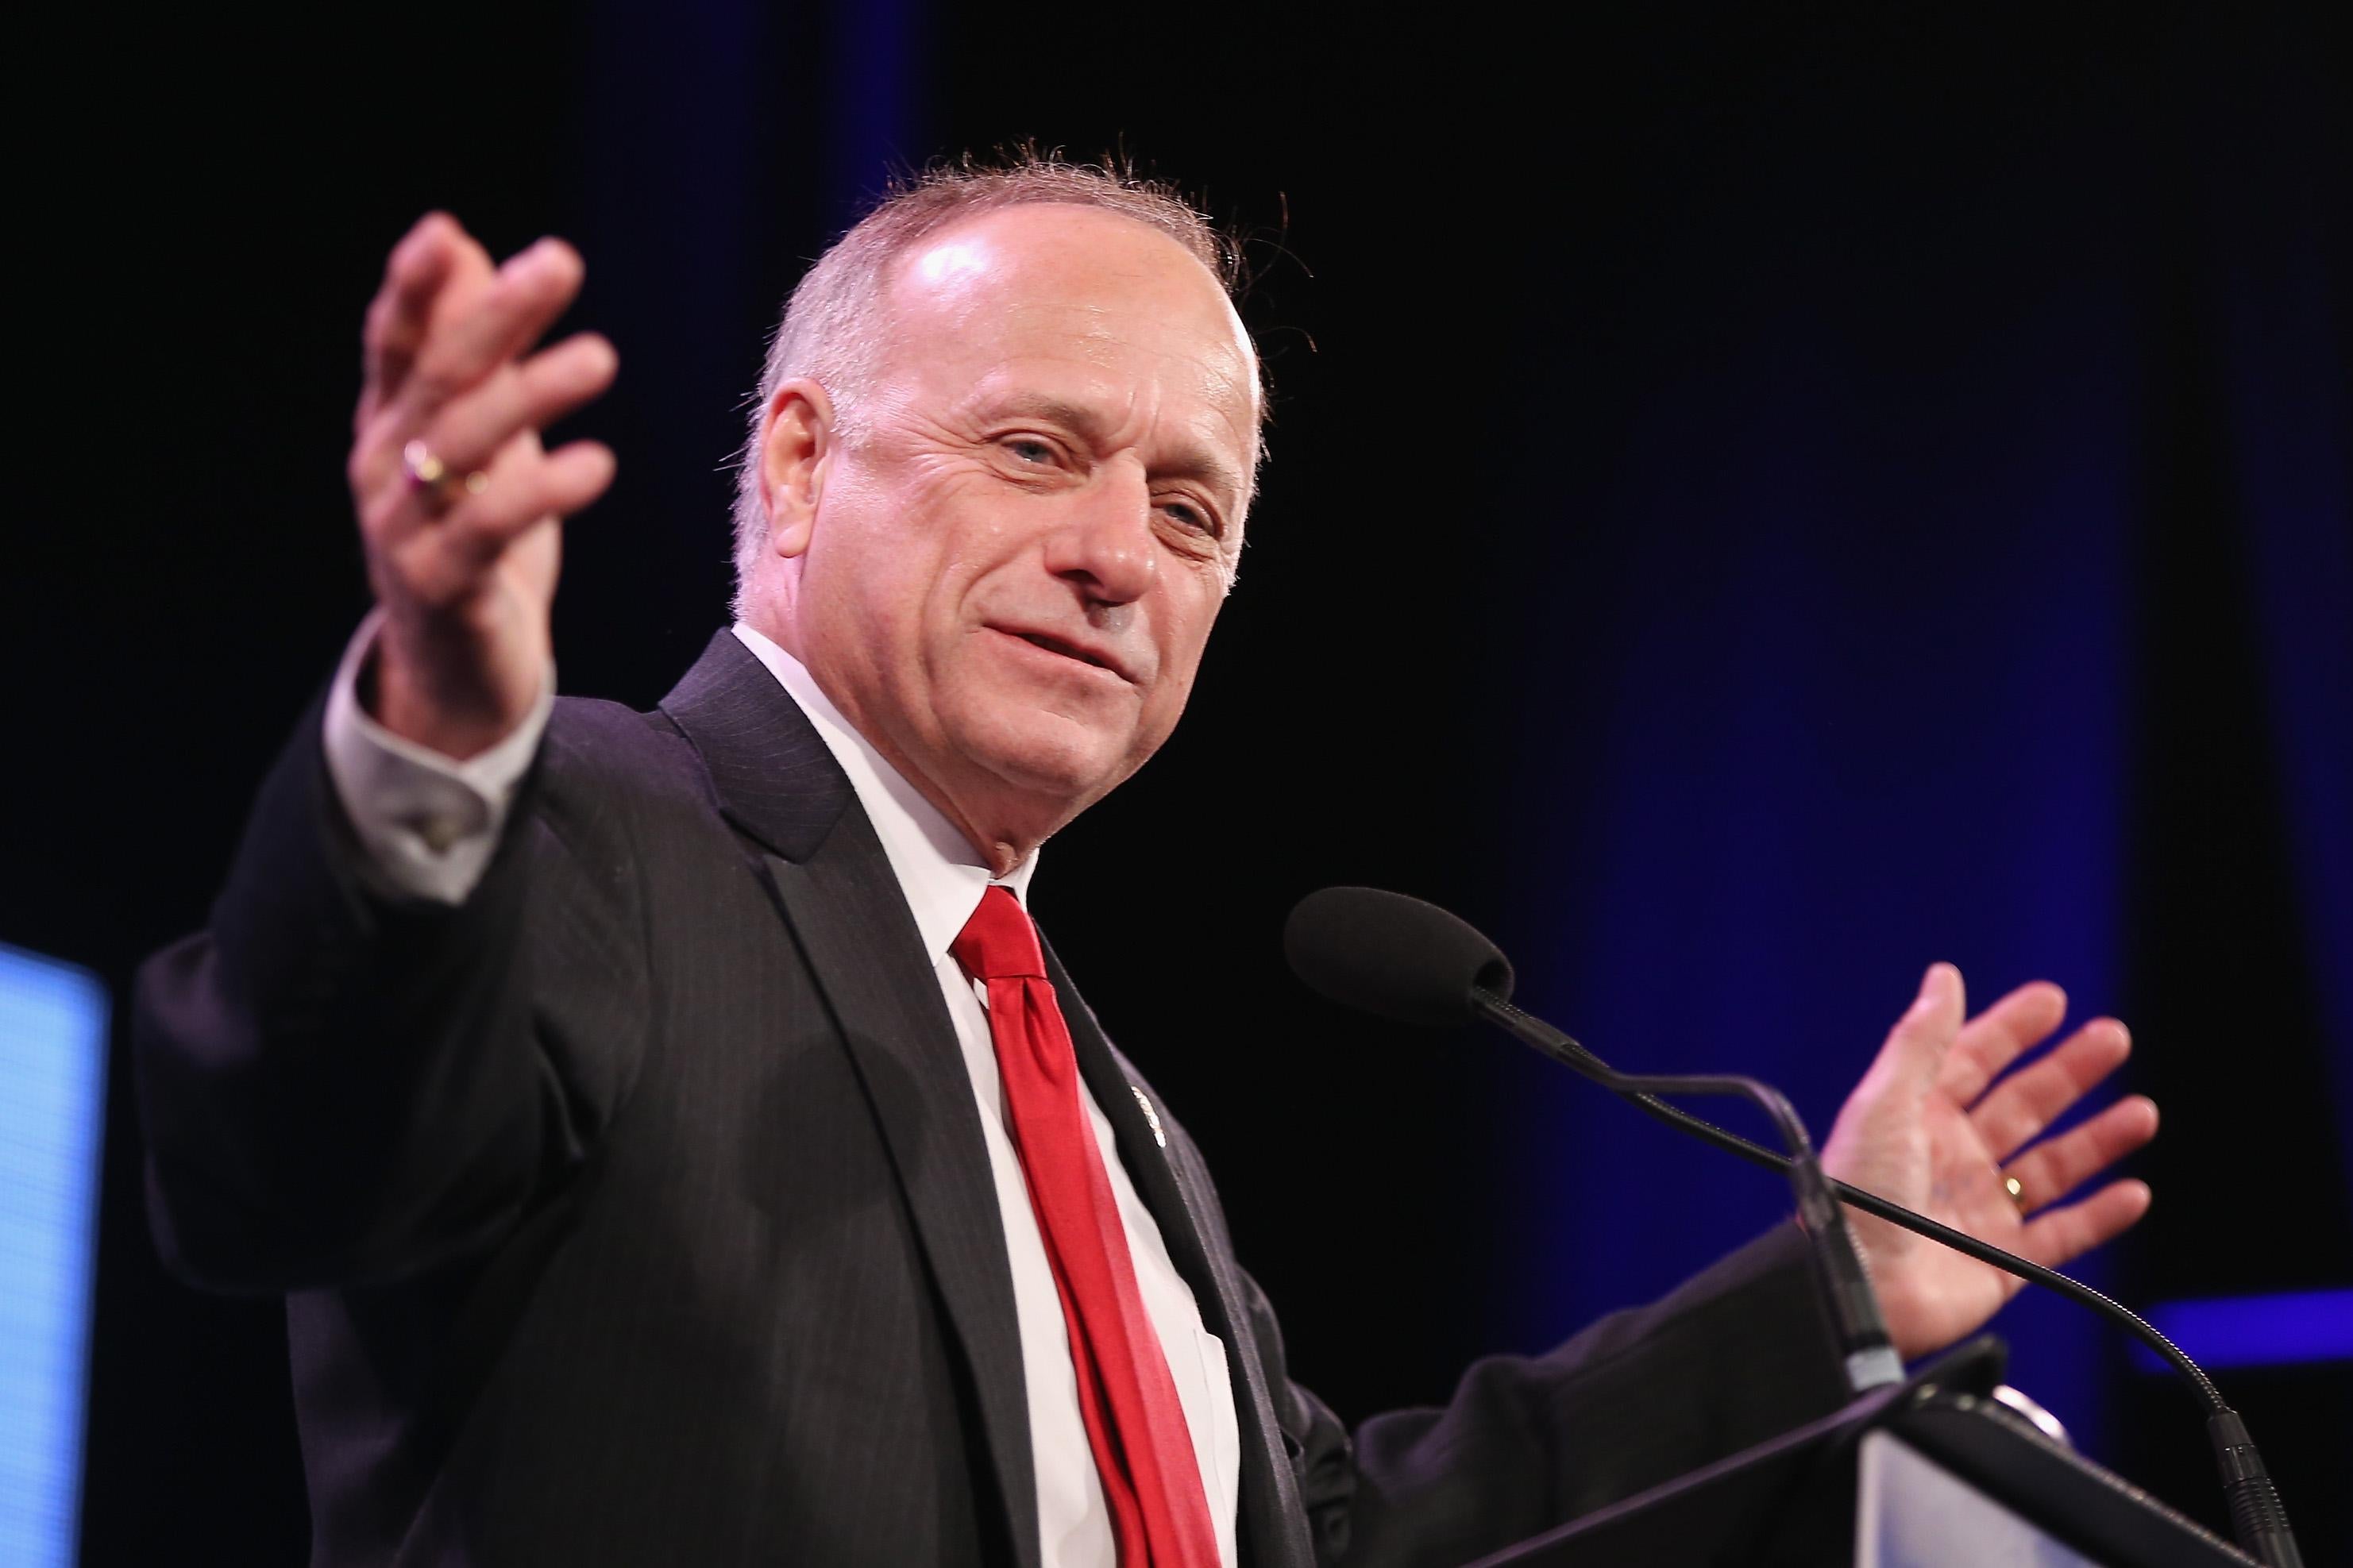 Steve King speaks at a podium, smiling with his arms outstretched.